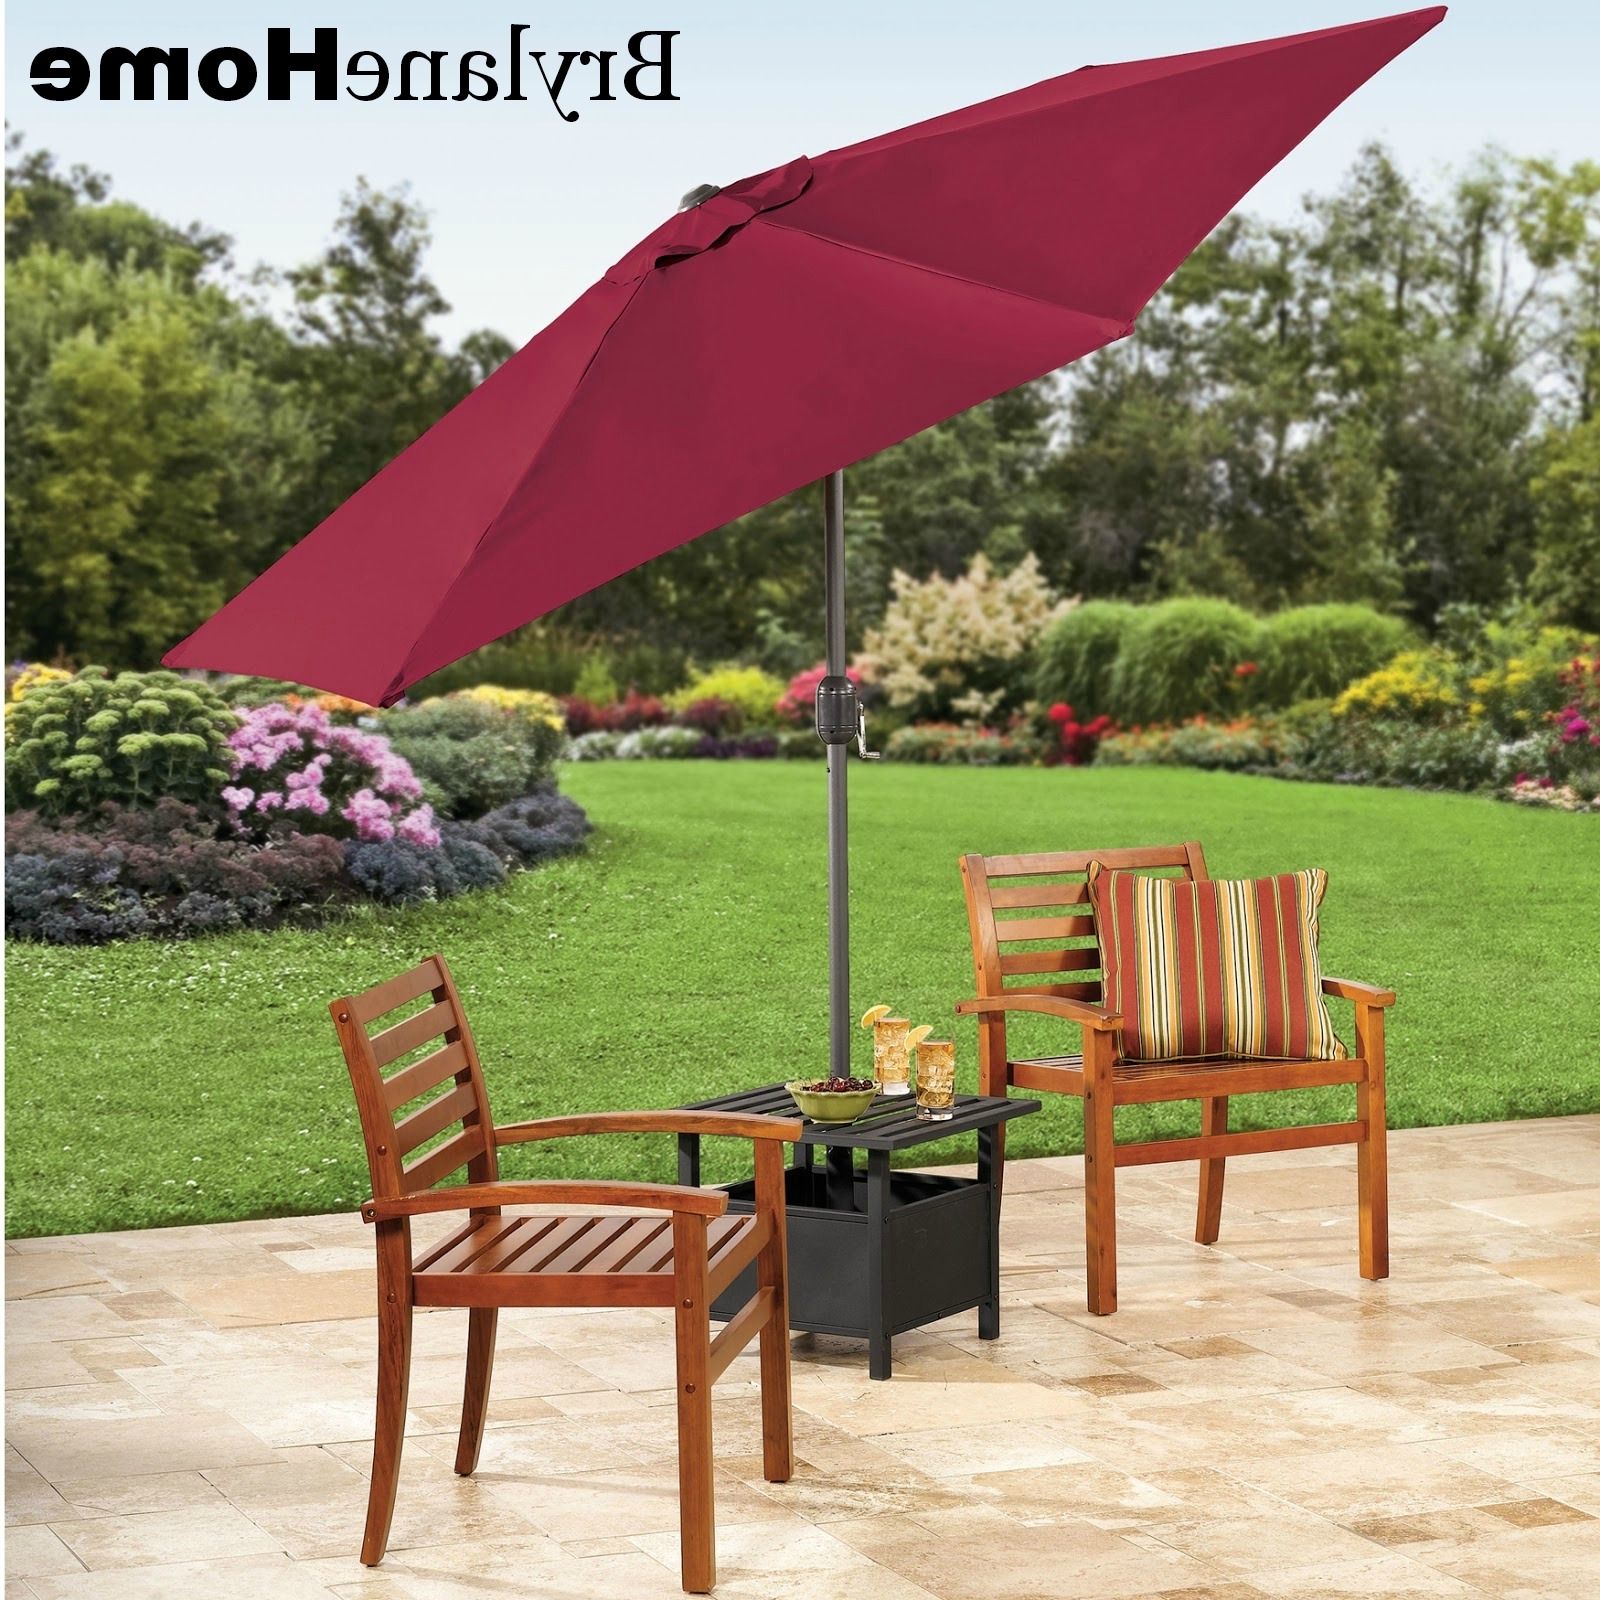 Patio Umbrella Stand Side Tables Regarding Best And Newest The Funky Monkey: Giveaway: Brylanehome 9' Patio Umbrella And (View 15 of 20)